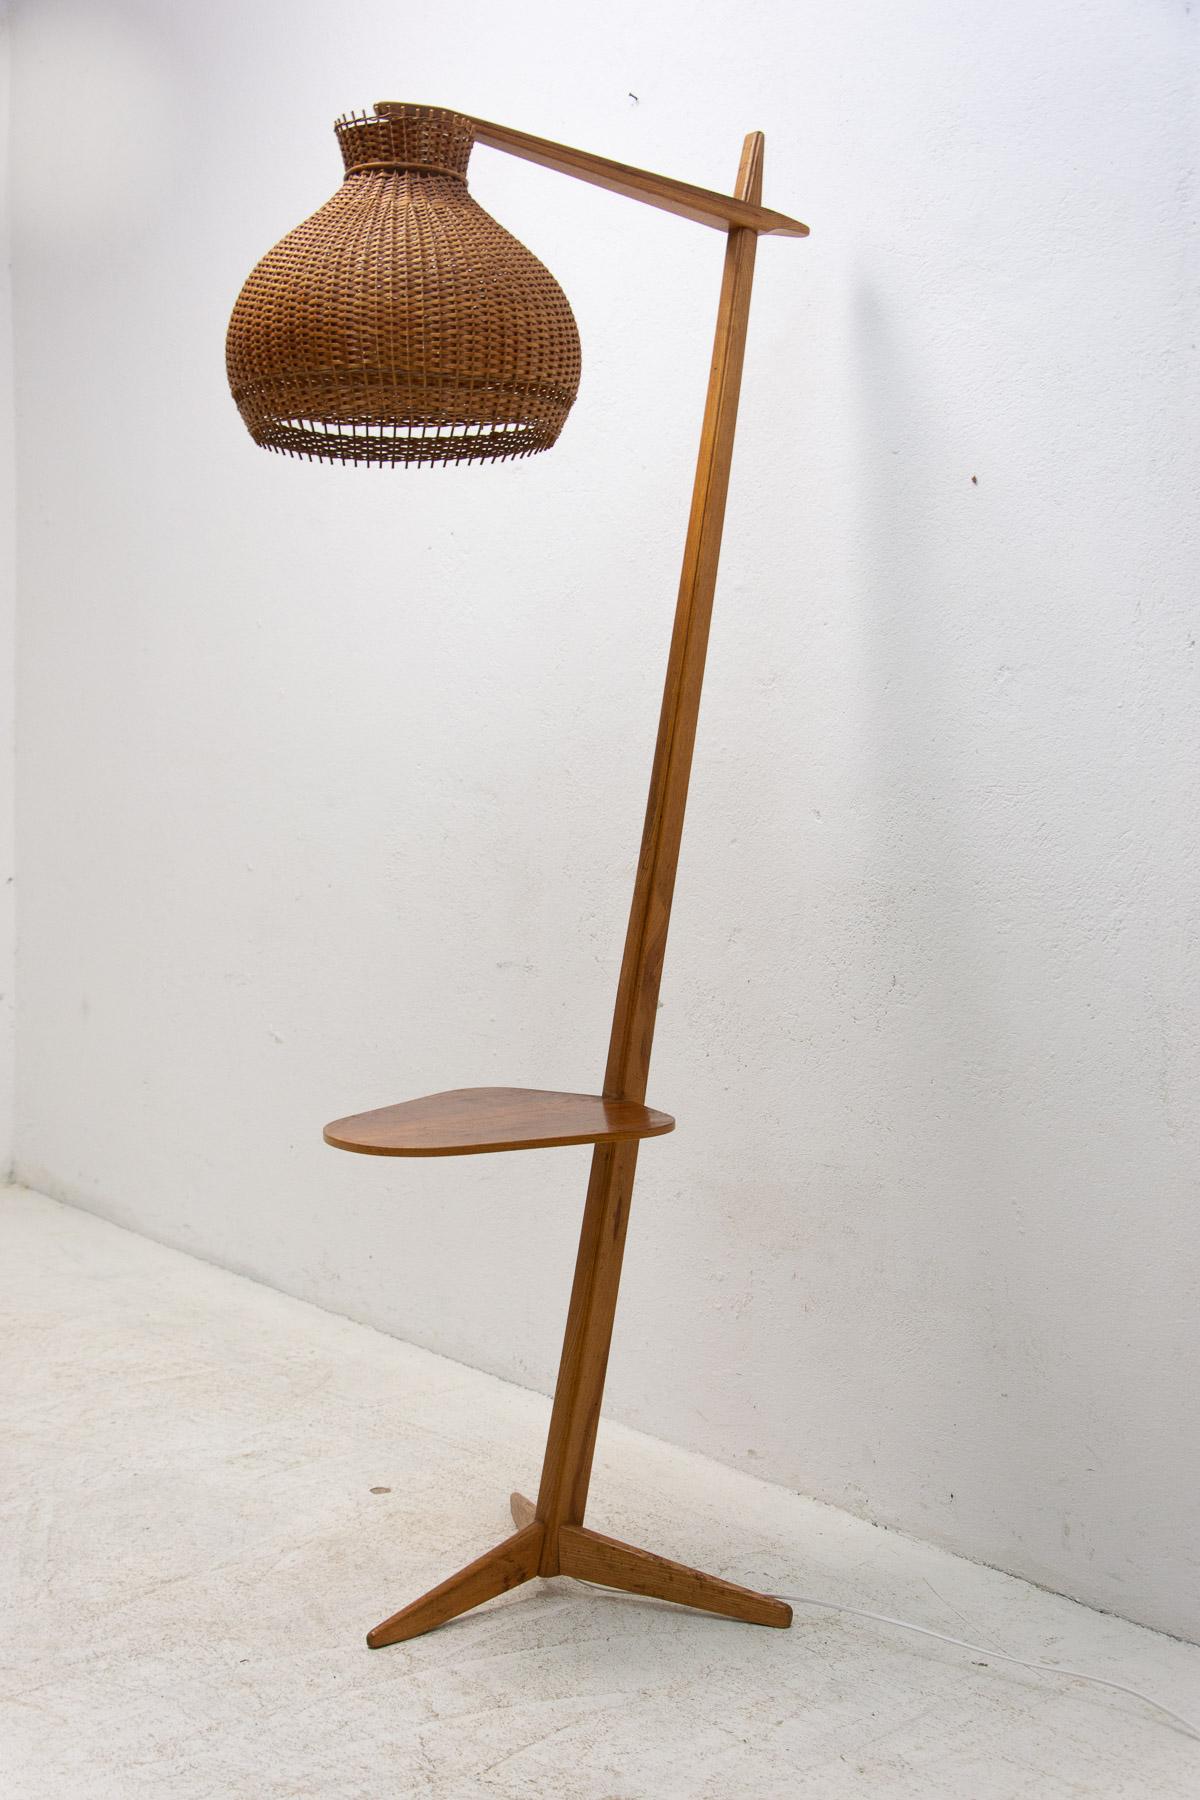 Mid century wooden floor lamp in oak with wicker lampshade.
Made in the 1950´s in the former Czechoslovakia, it was produced for “Krasna Jizba” company. In very good condition, new wiring, one E27 bulb, UP to 250 V.

Height: 168 cm

width: 67